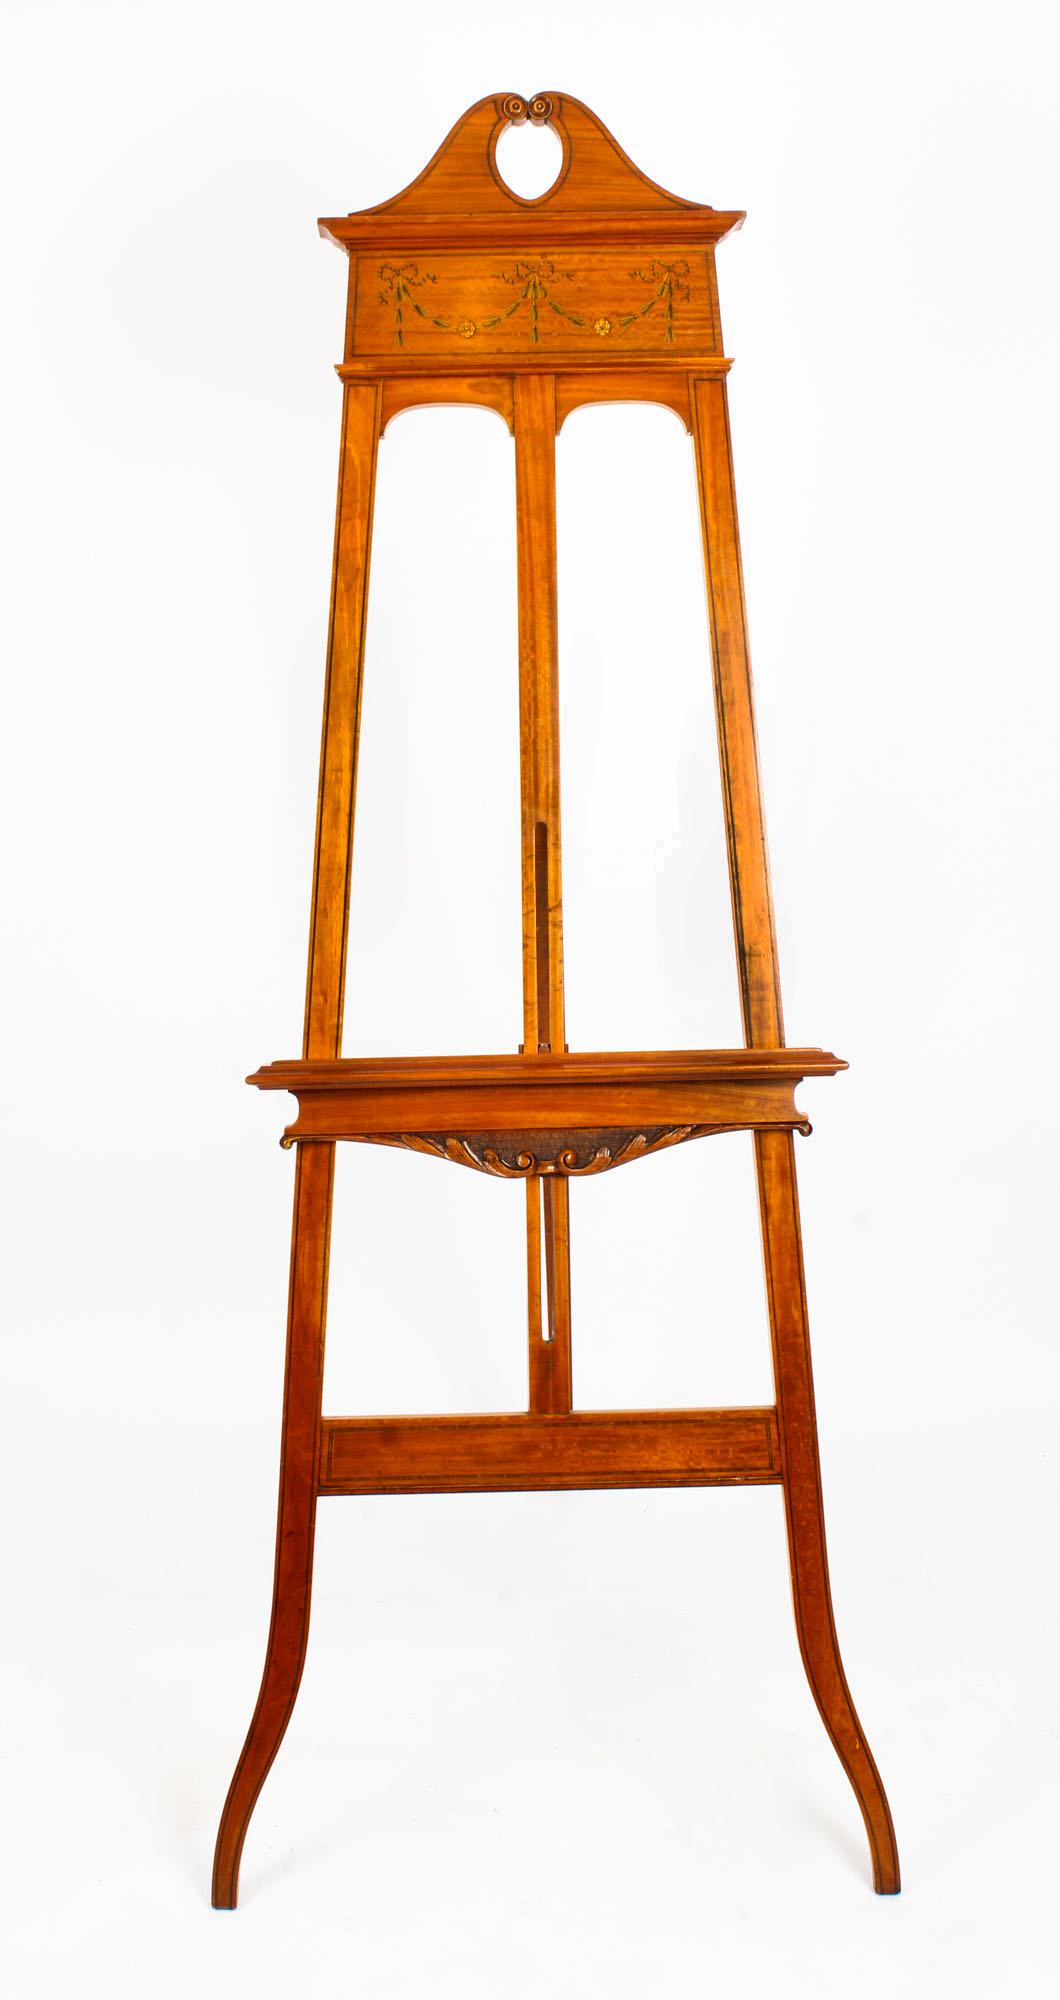 A beautiful antique Edwardian satinwood display easel, circa 1900 in date.

The easel features superb hand painted and carved decoration with an adjustable shelf.

It is superbly hand painted with garlands of flowers, bows and ribbons, and
the